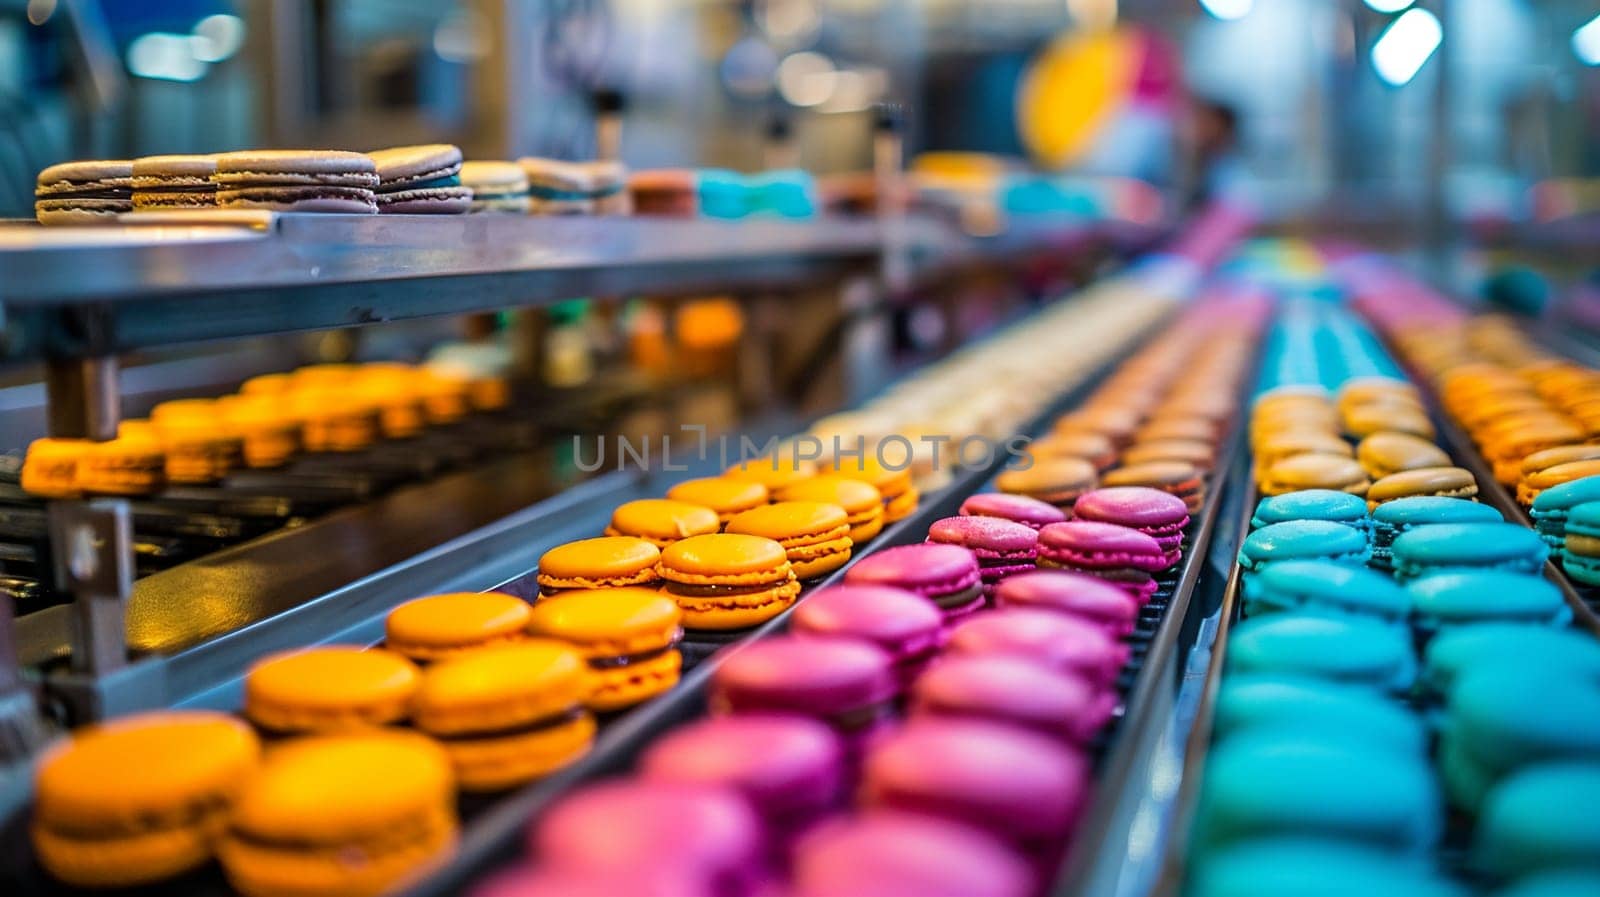 Industrial production line of vibrant macaroons automated manufacturing process, colorful dessert treats in factory setting.